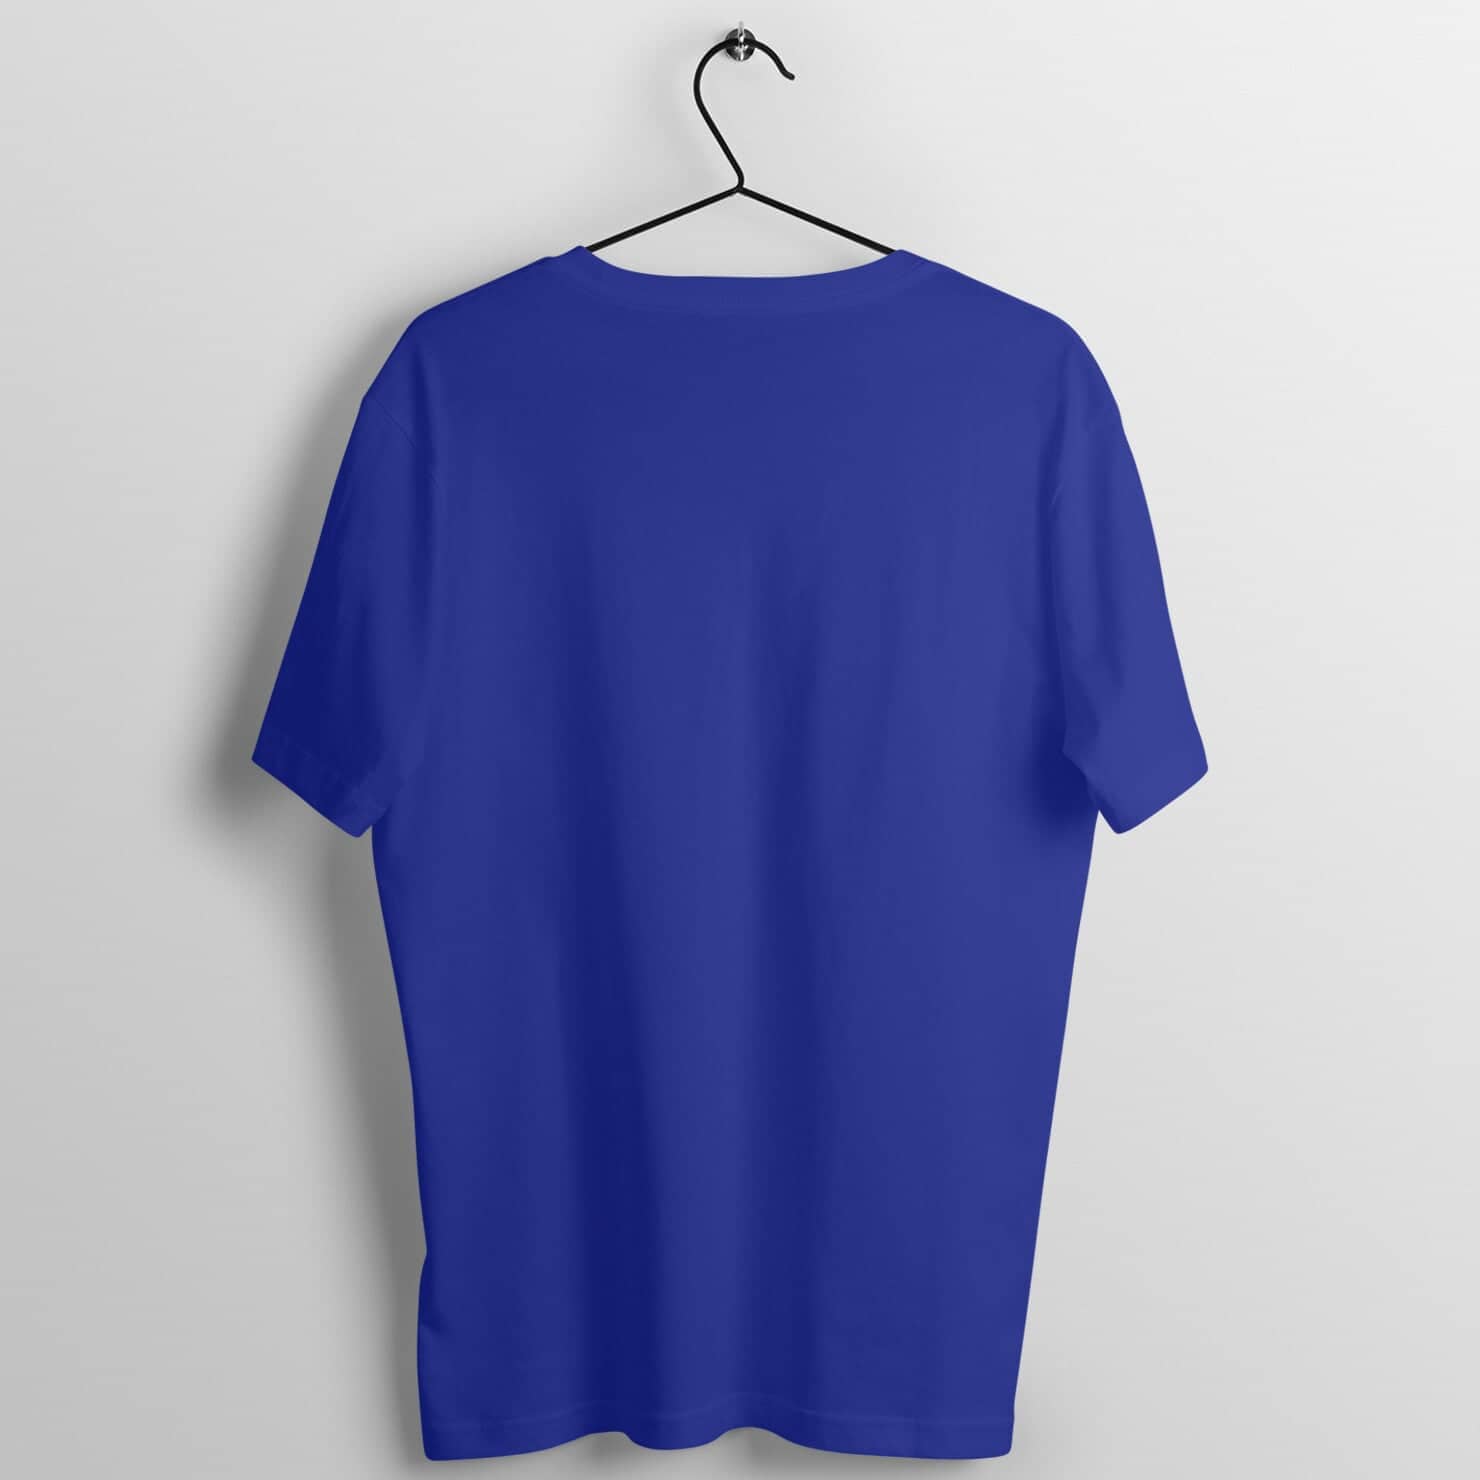 And For That Reason I'm Out Exclusive Royal Blue Shark T Shirt for Men and Women freeshipping - Catch My Drift India